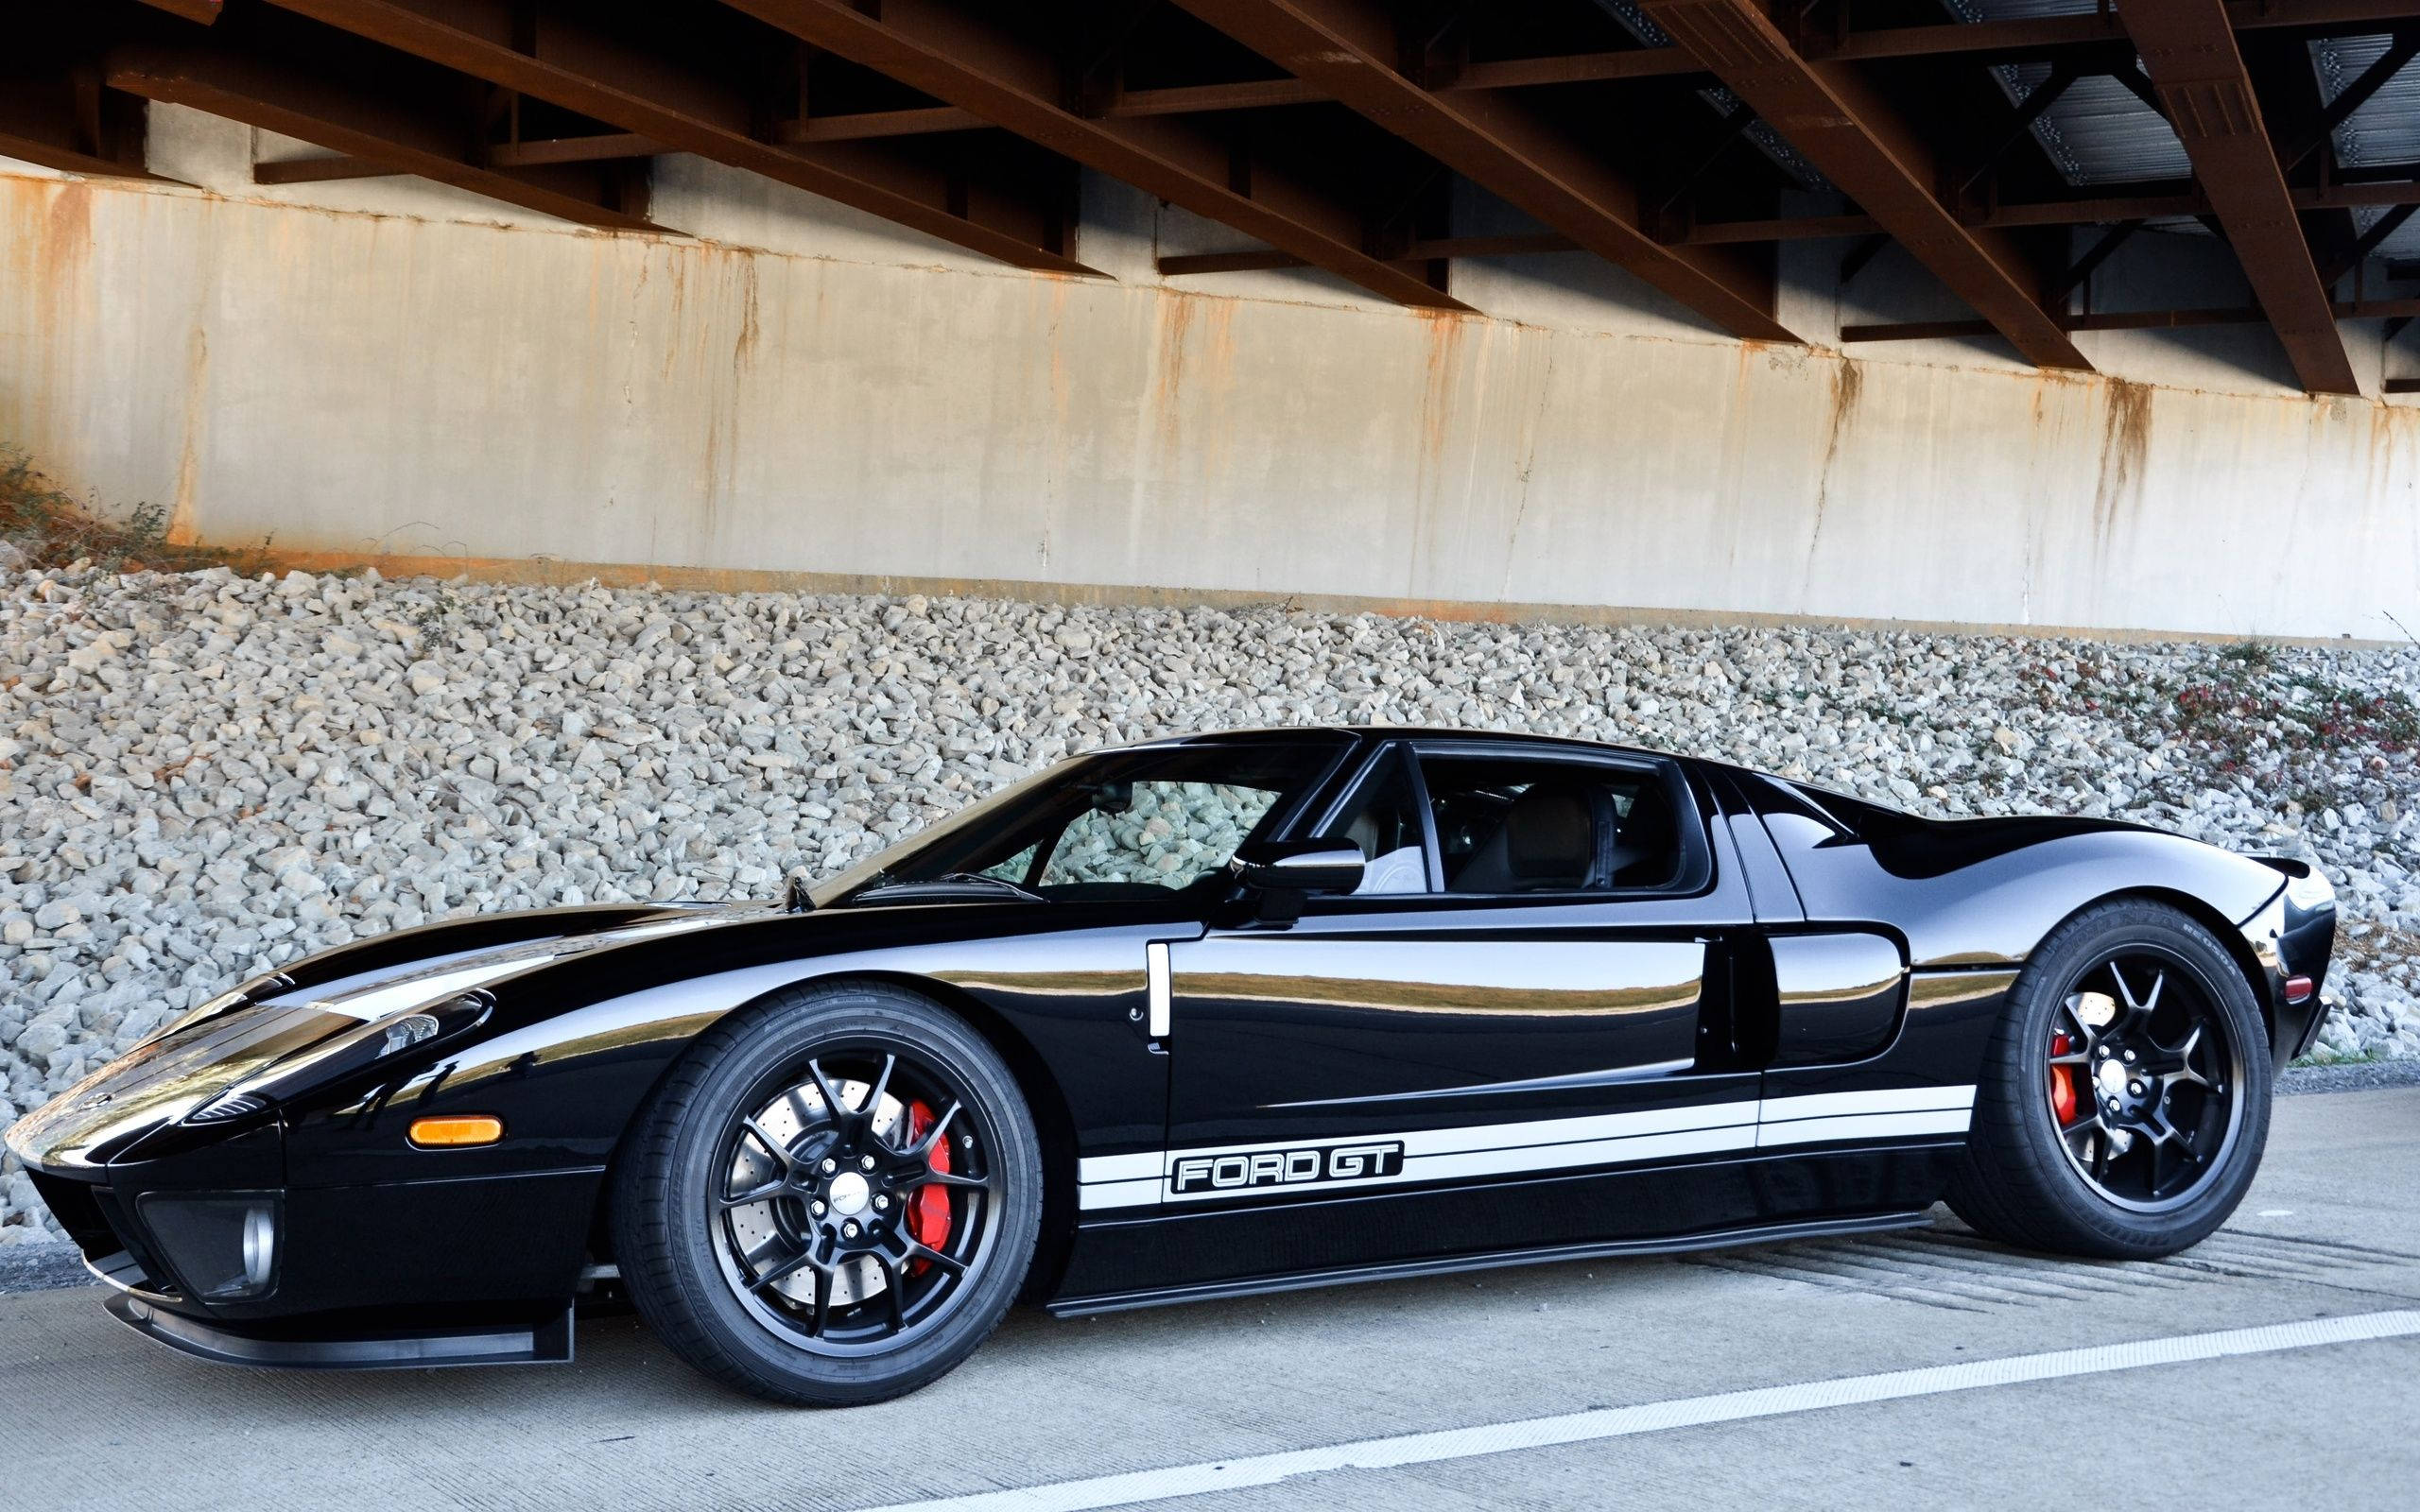 Stunning Black 2005 Ford Gt In Hd Background